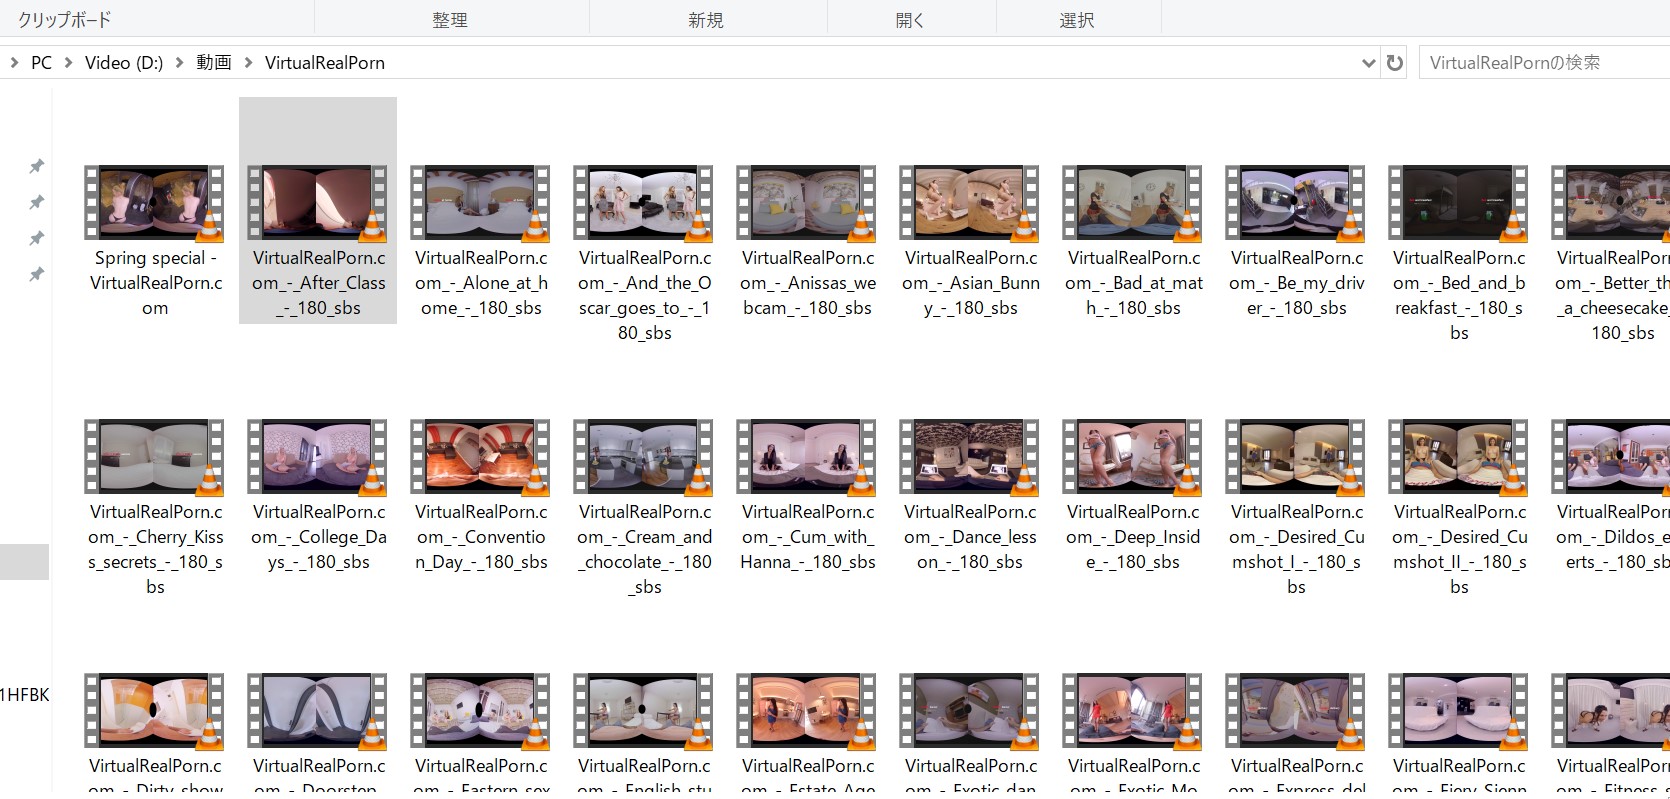 some of the VR SEX videos that I downloaded when I was a member of VirtualRealPorn